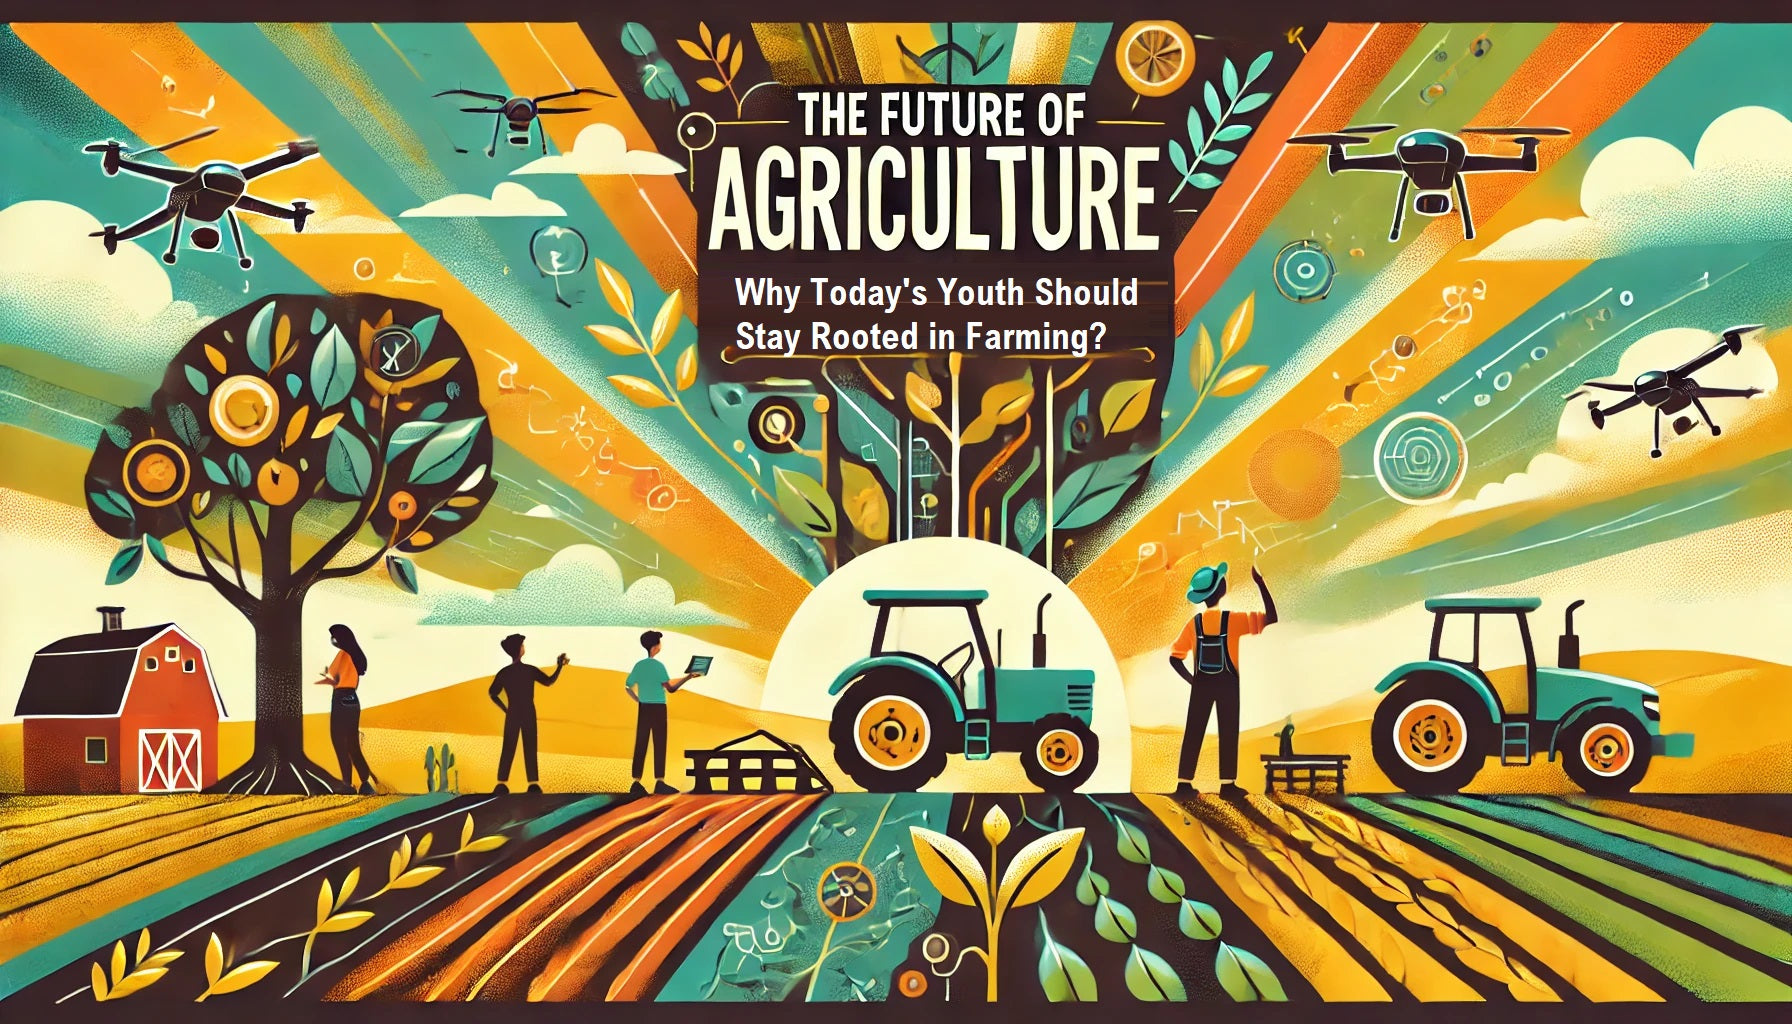 The Future of Agriculture: Why Today's Youth Should Stay Rooted in Farming